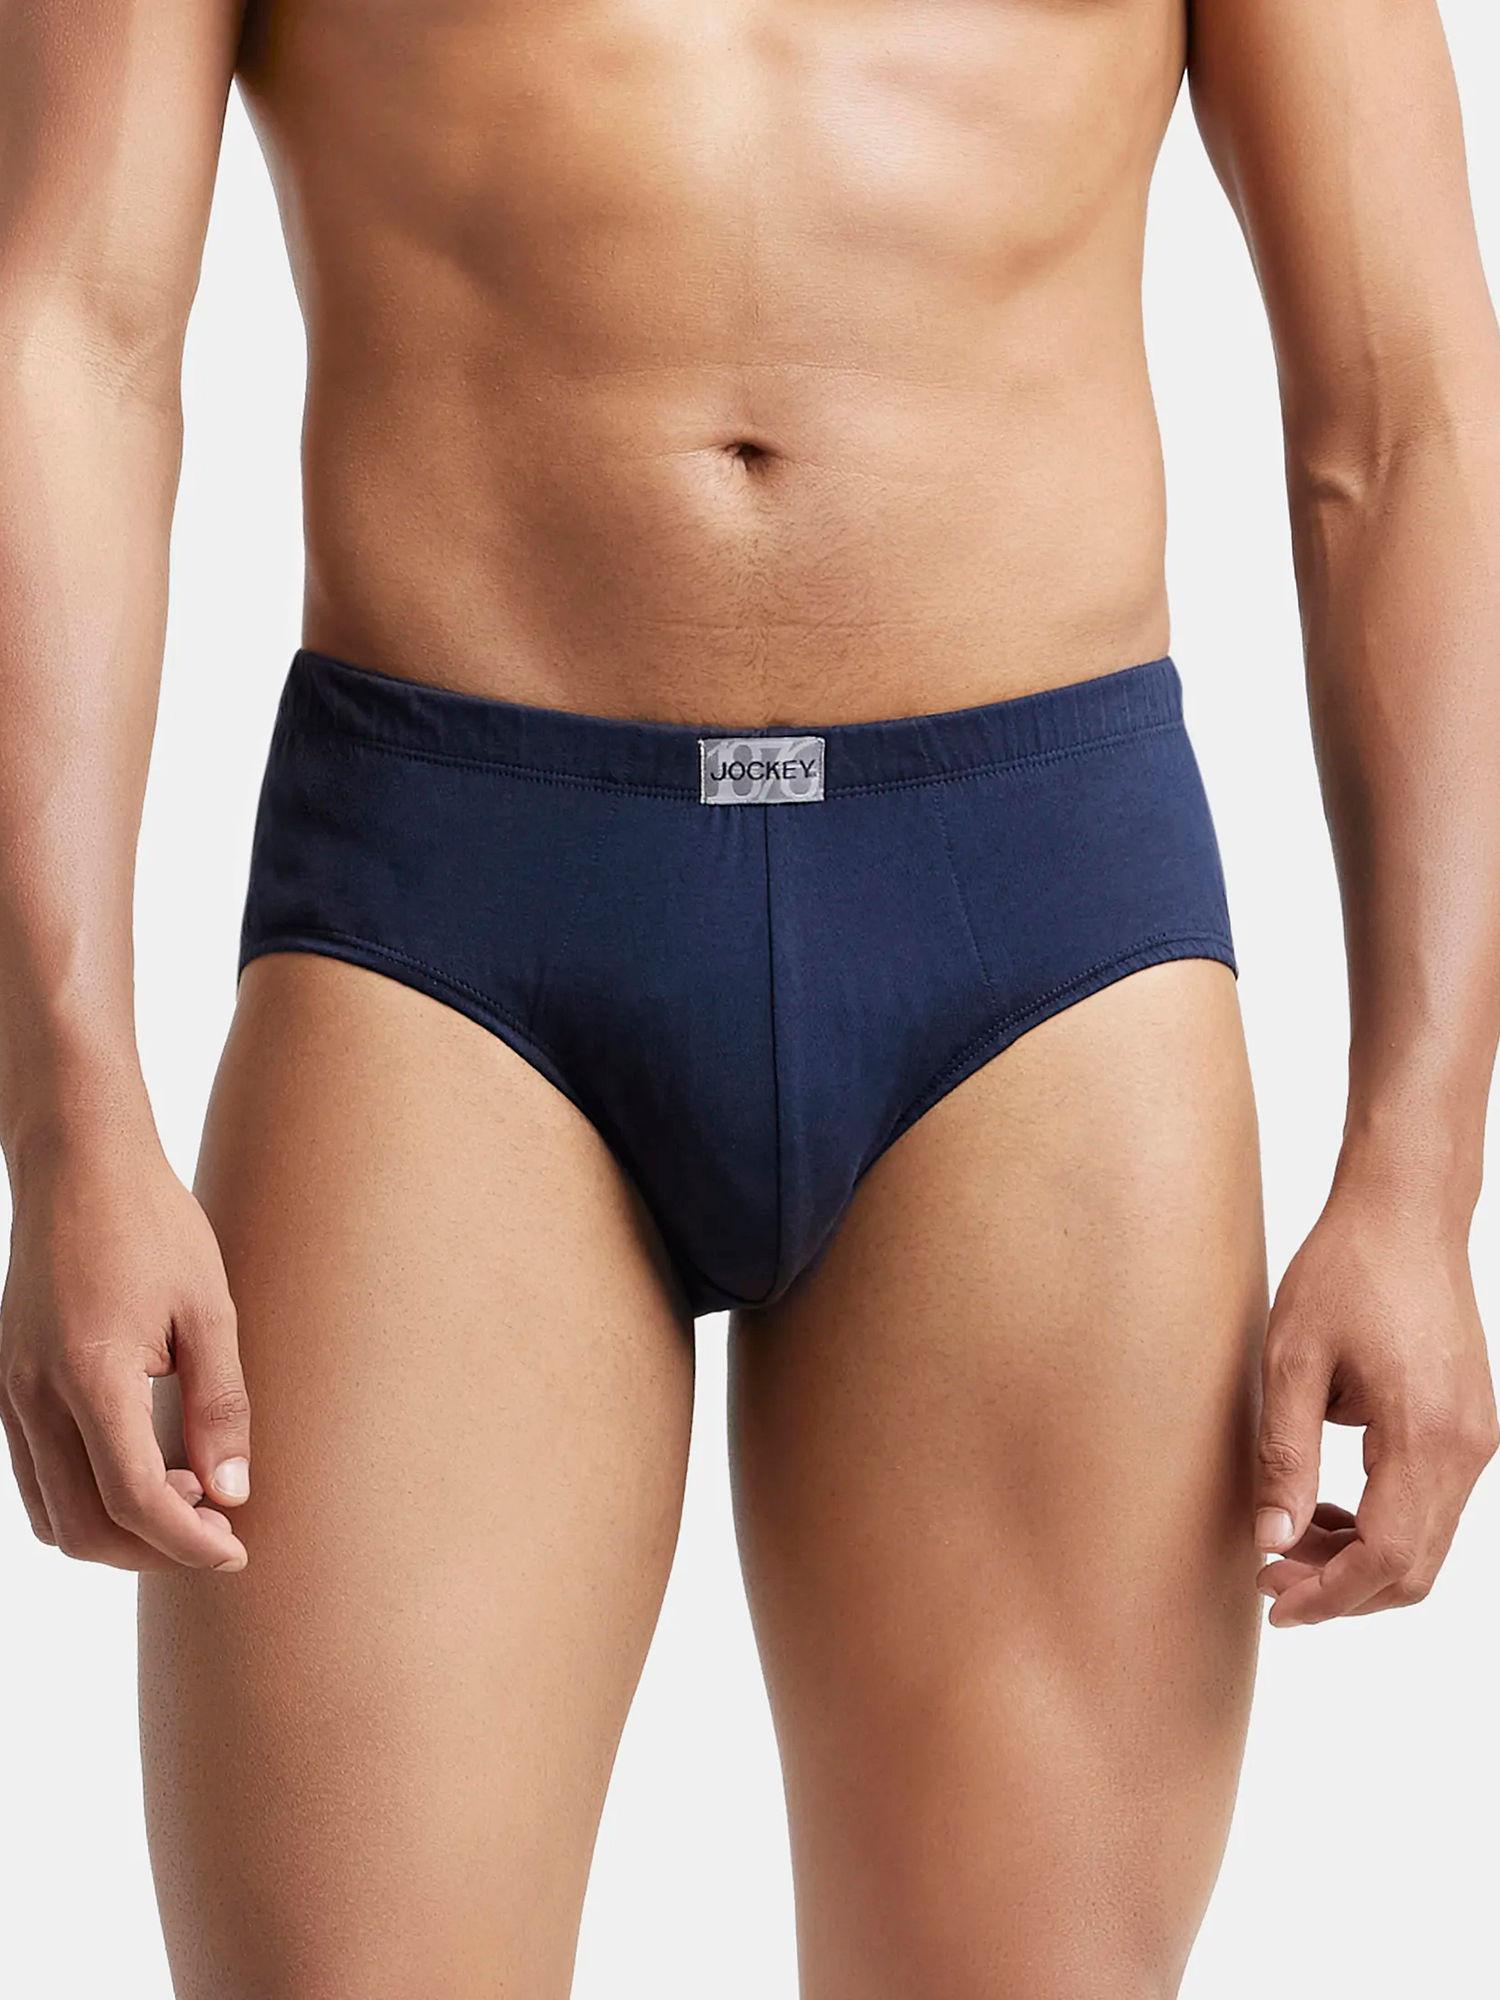 8035-mens-super-cotton-solid-poco-brief-with-ultrasoft-concealed-waistband-blue